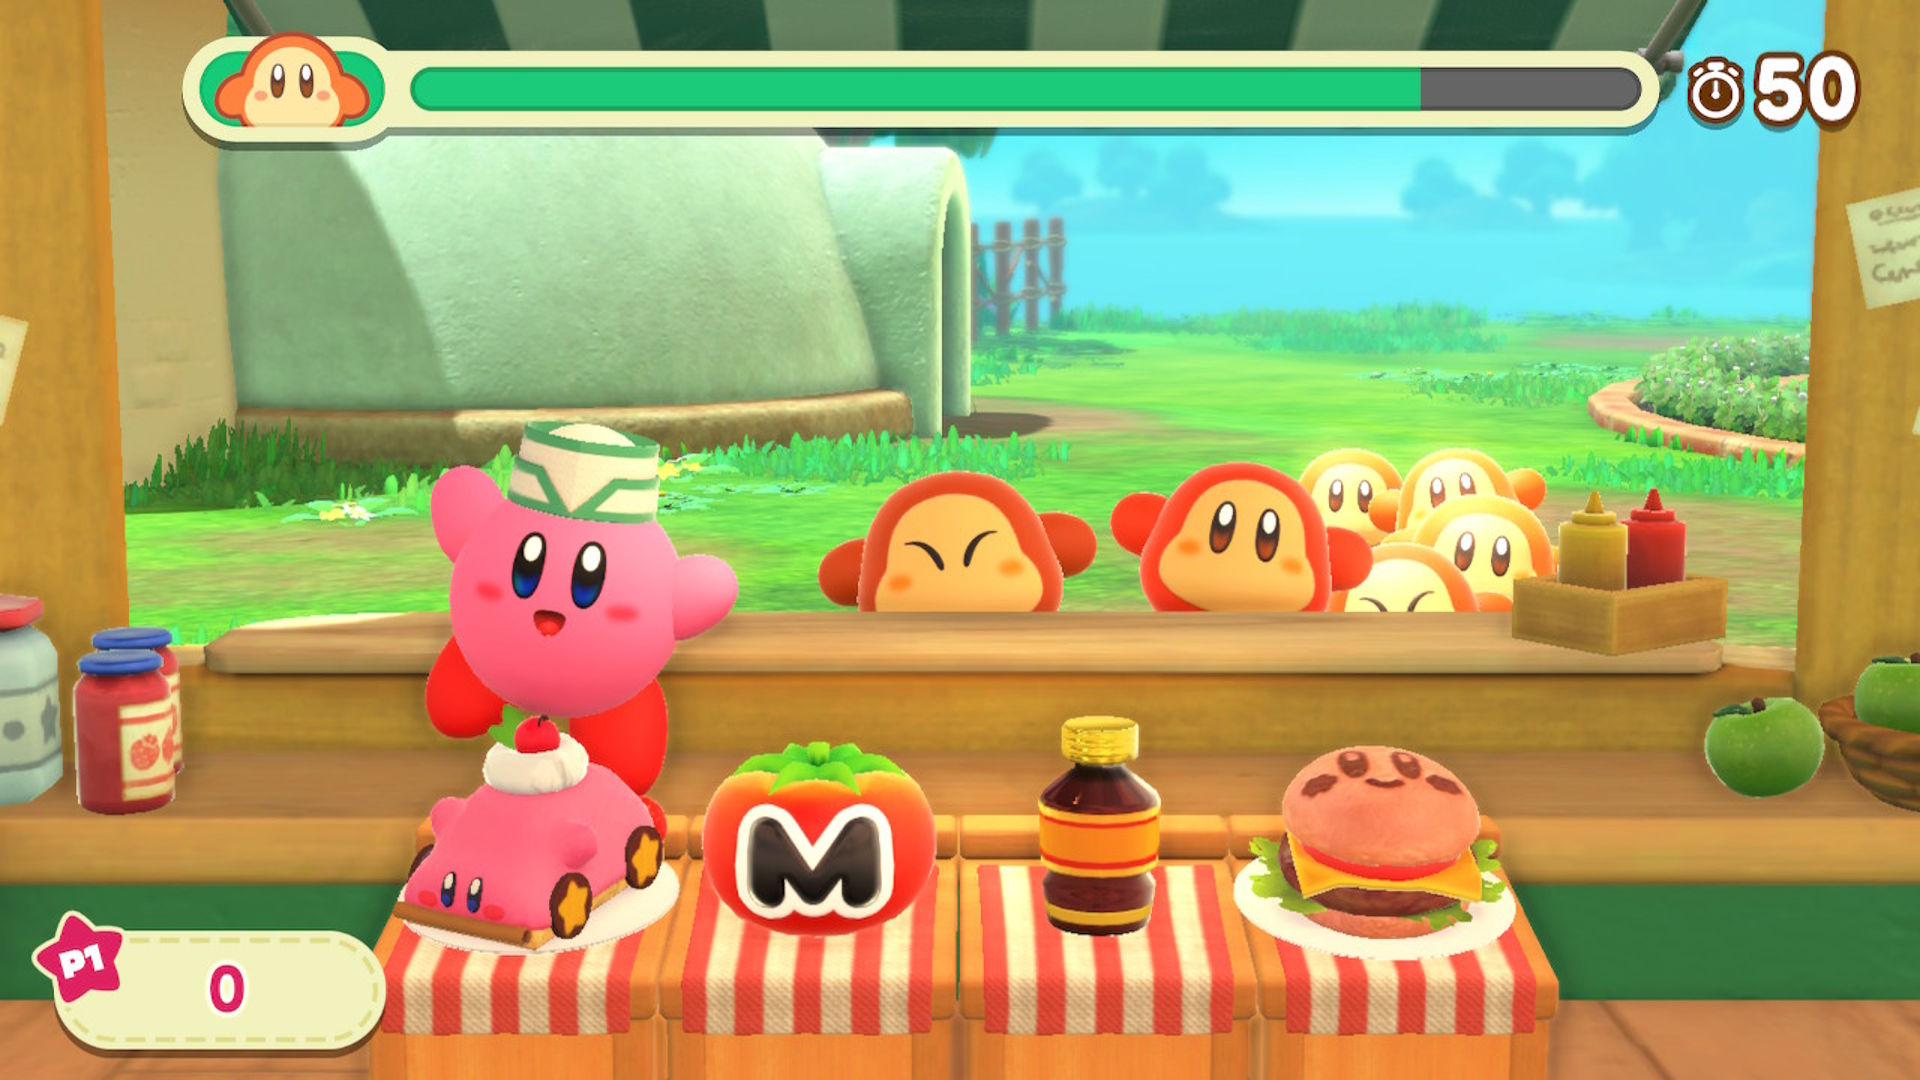 Kirby and the Forgotten Land review - a mouthful of magic